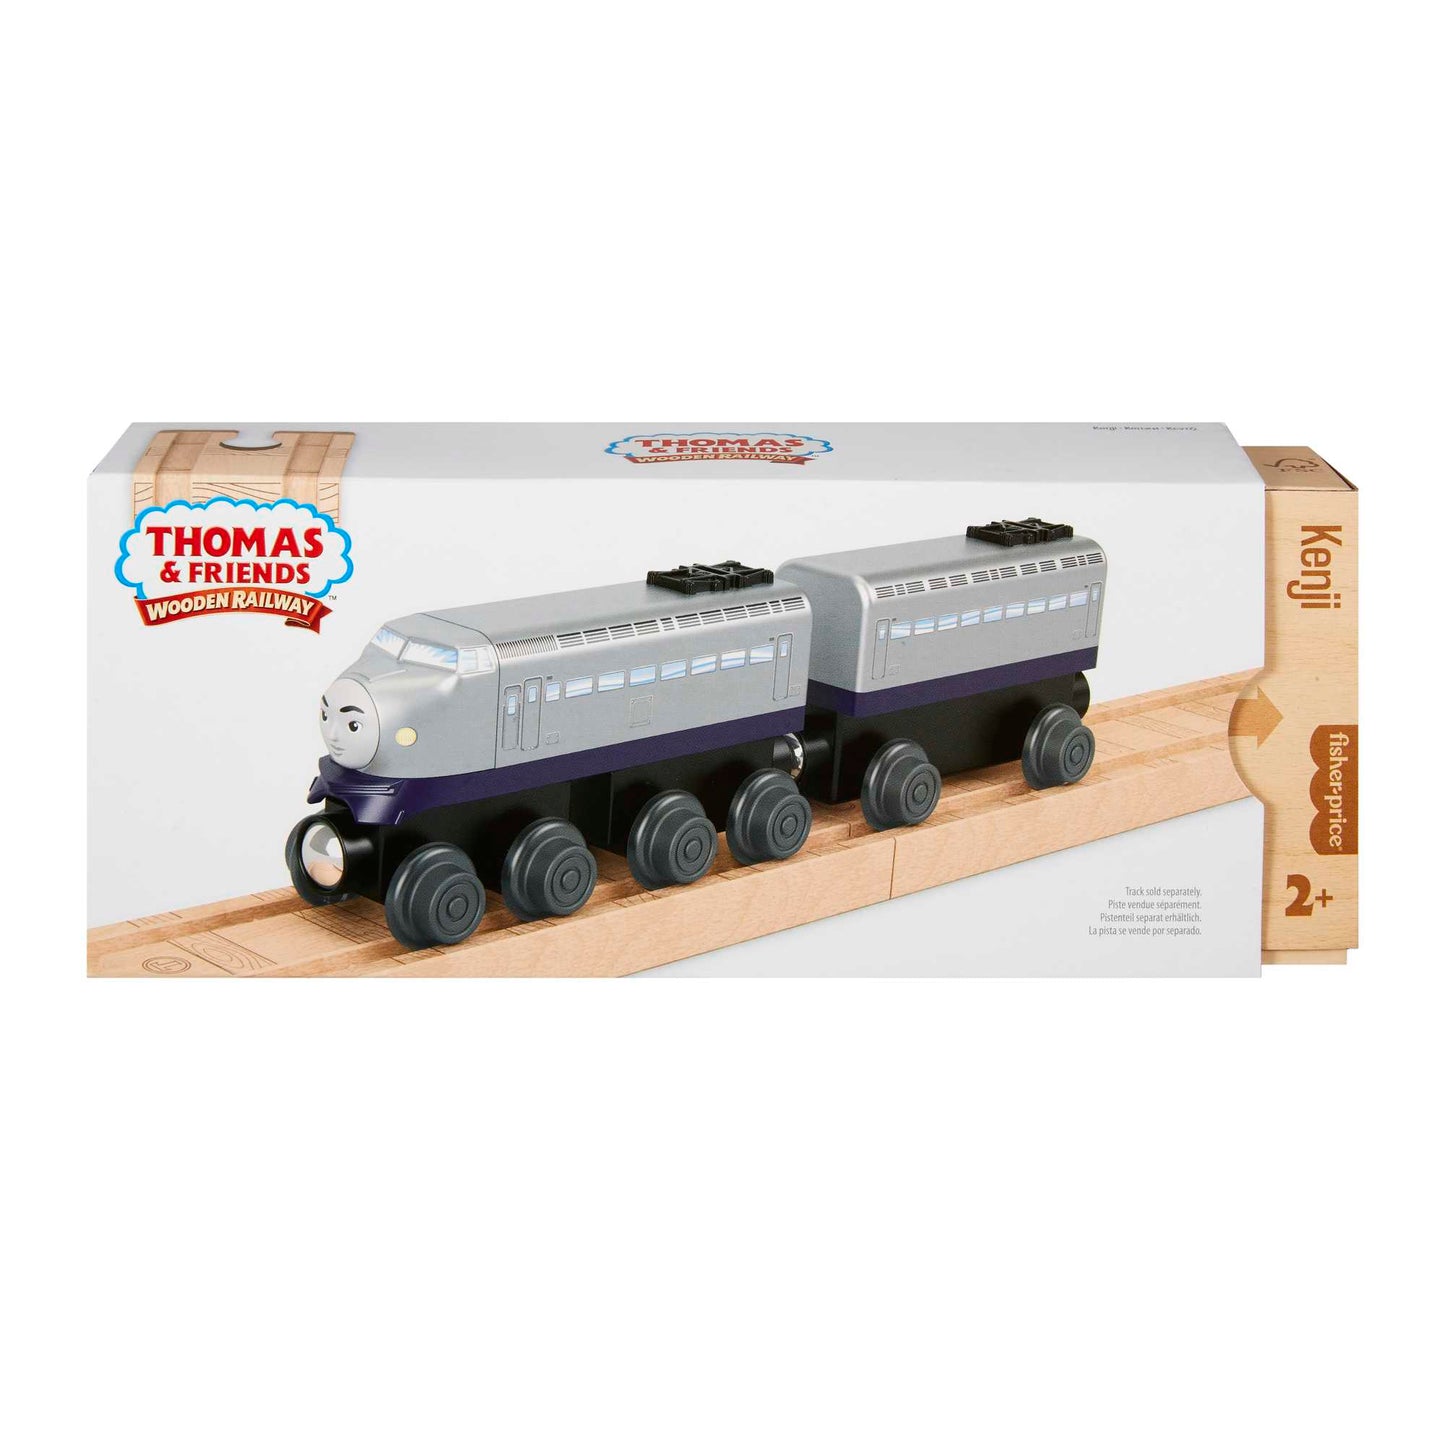 Fisher-Price Thomas & Friends Wooden Railway Kenji Engine and Car